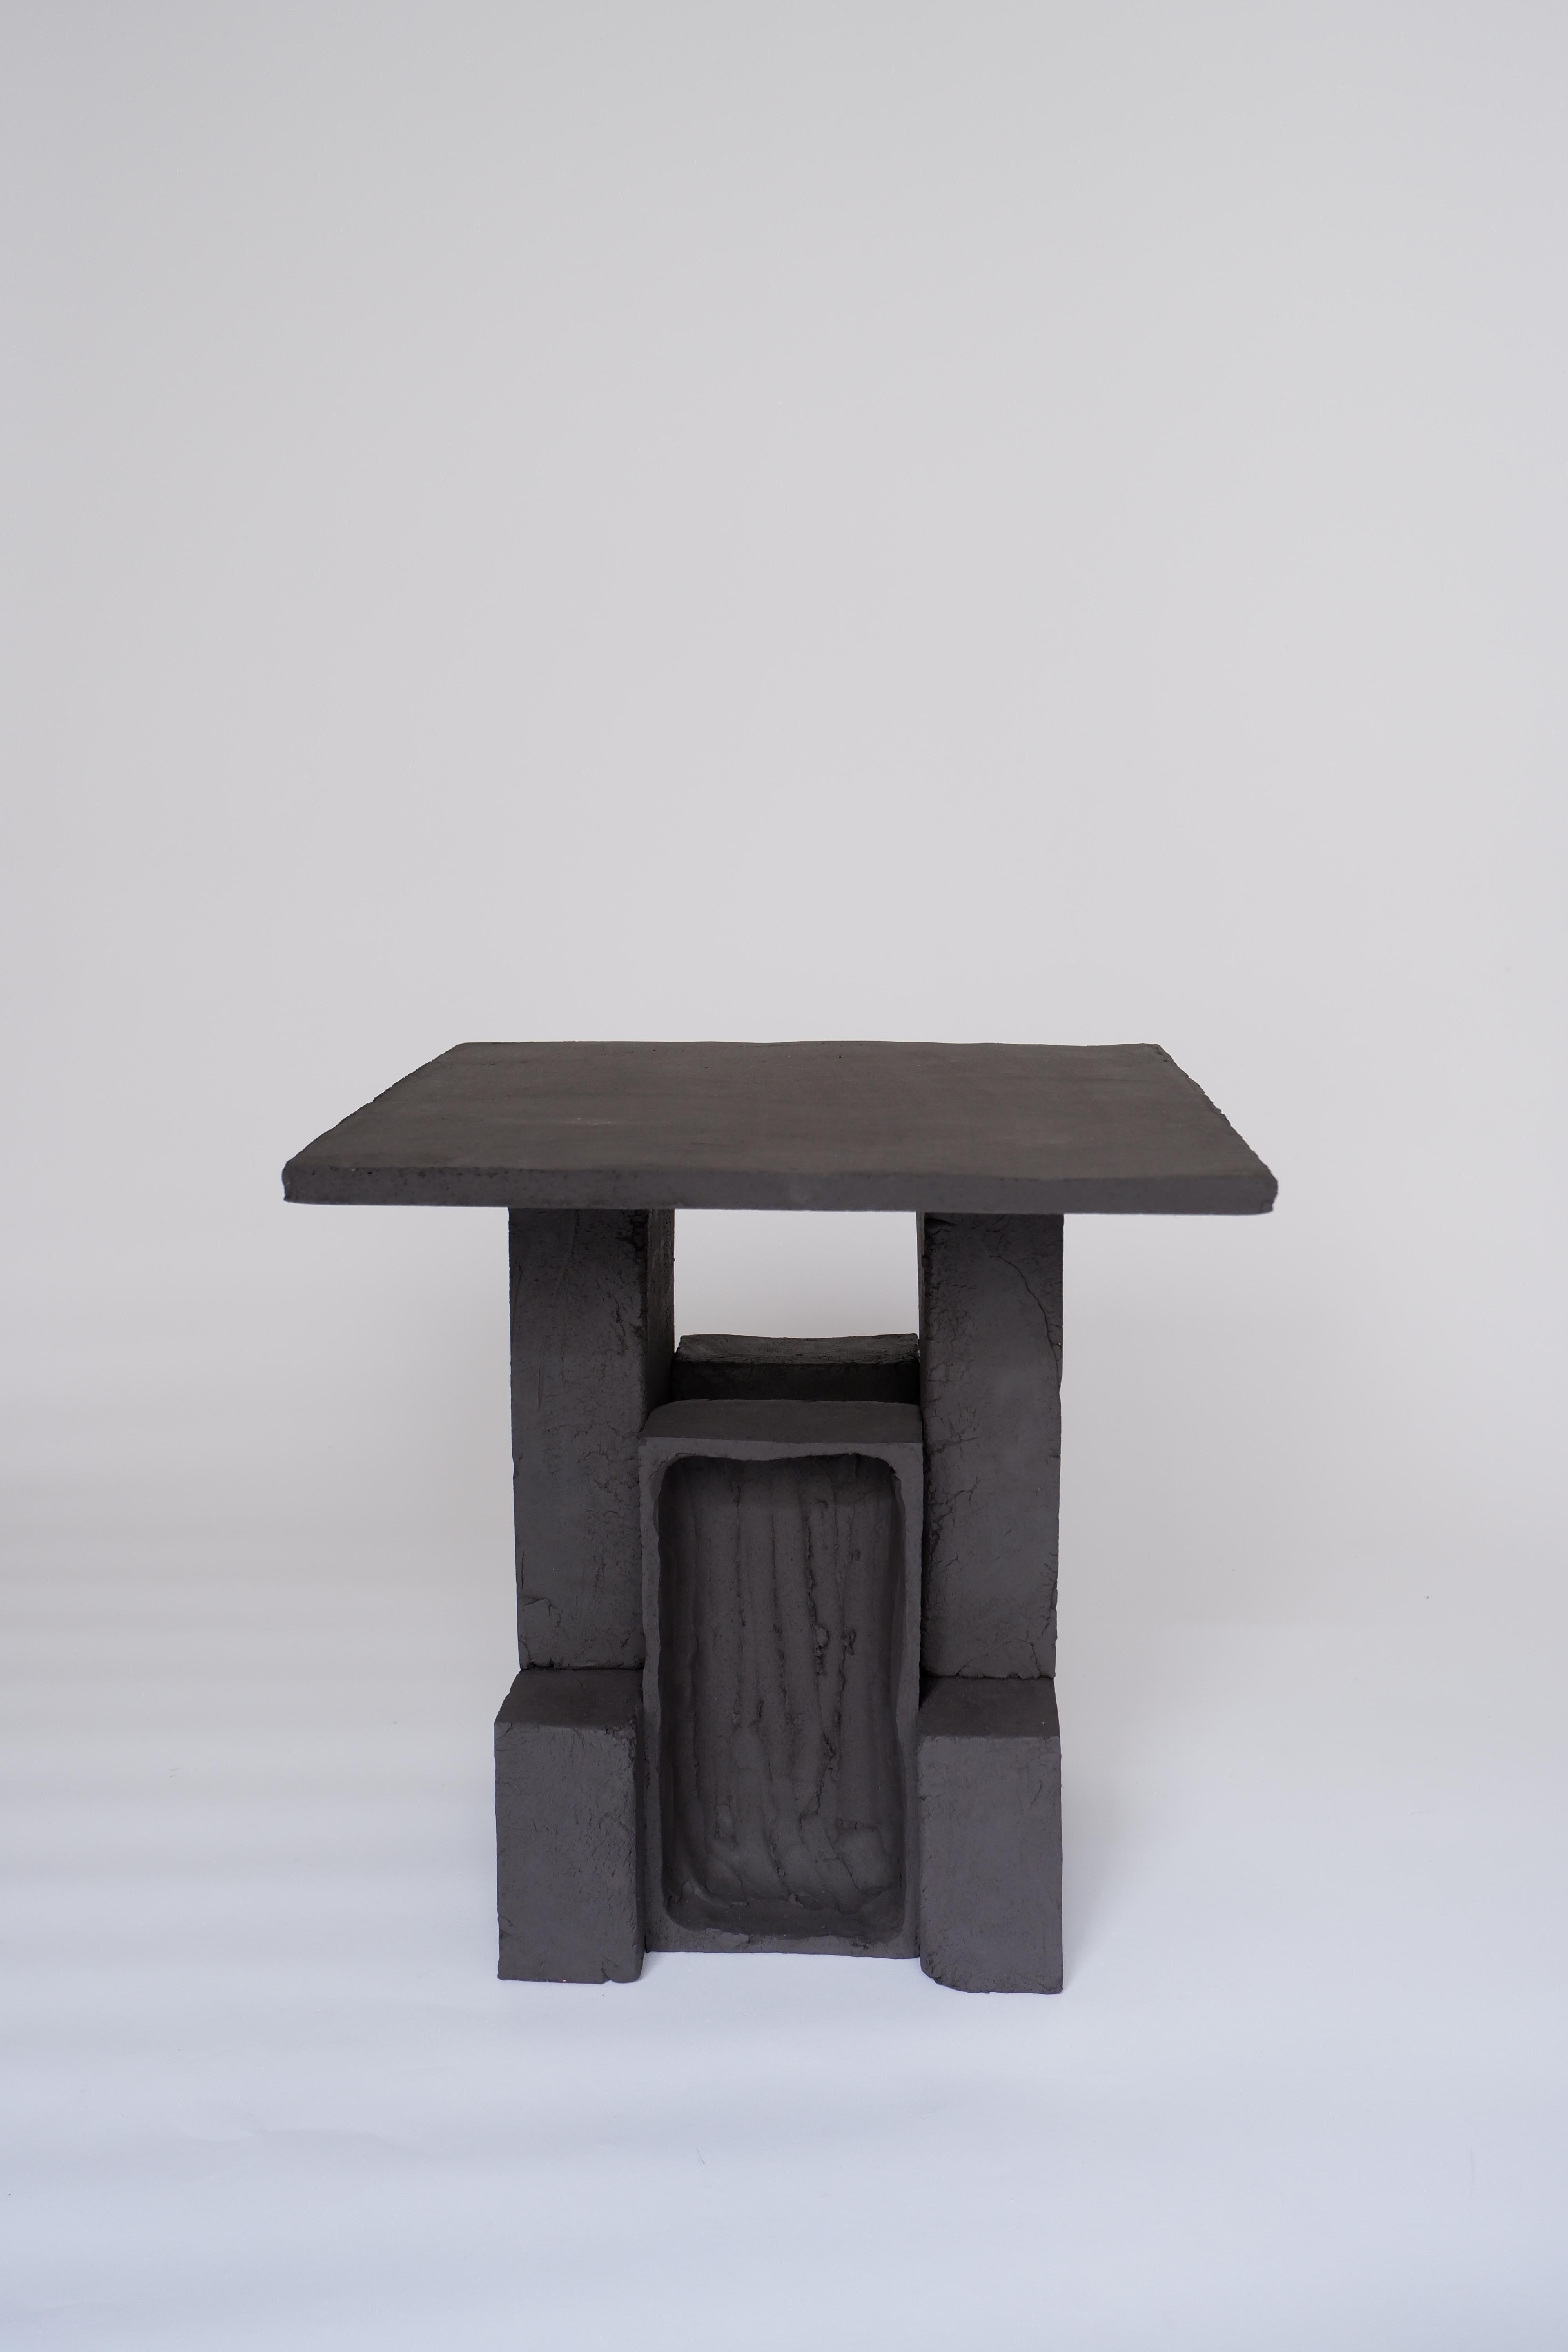 T03 Coffee Table by Ia Kutateladze
One Of  A Kind.
Dimensions: D 35 x H 37 cm.
Materials: Black clay.

Each piece is one of a kind, due to its free hand-building process. The top is always irregular and one of a kind. Possible material variations: